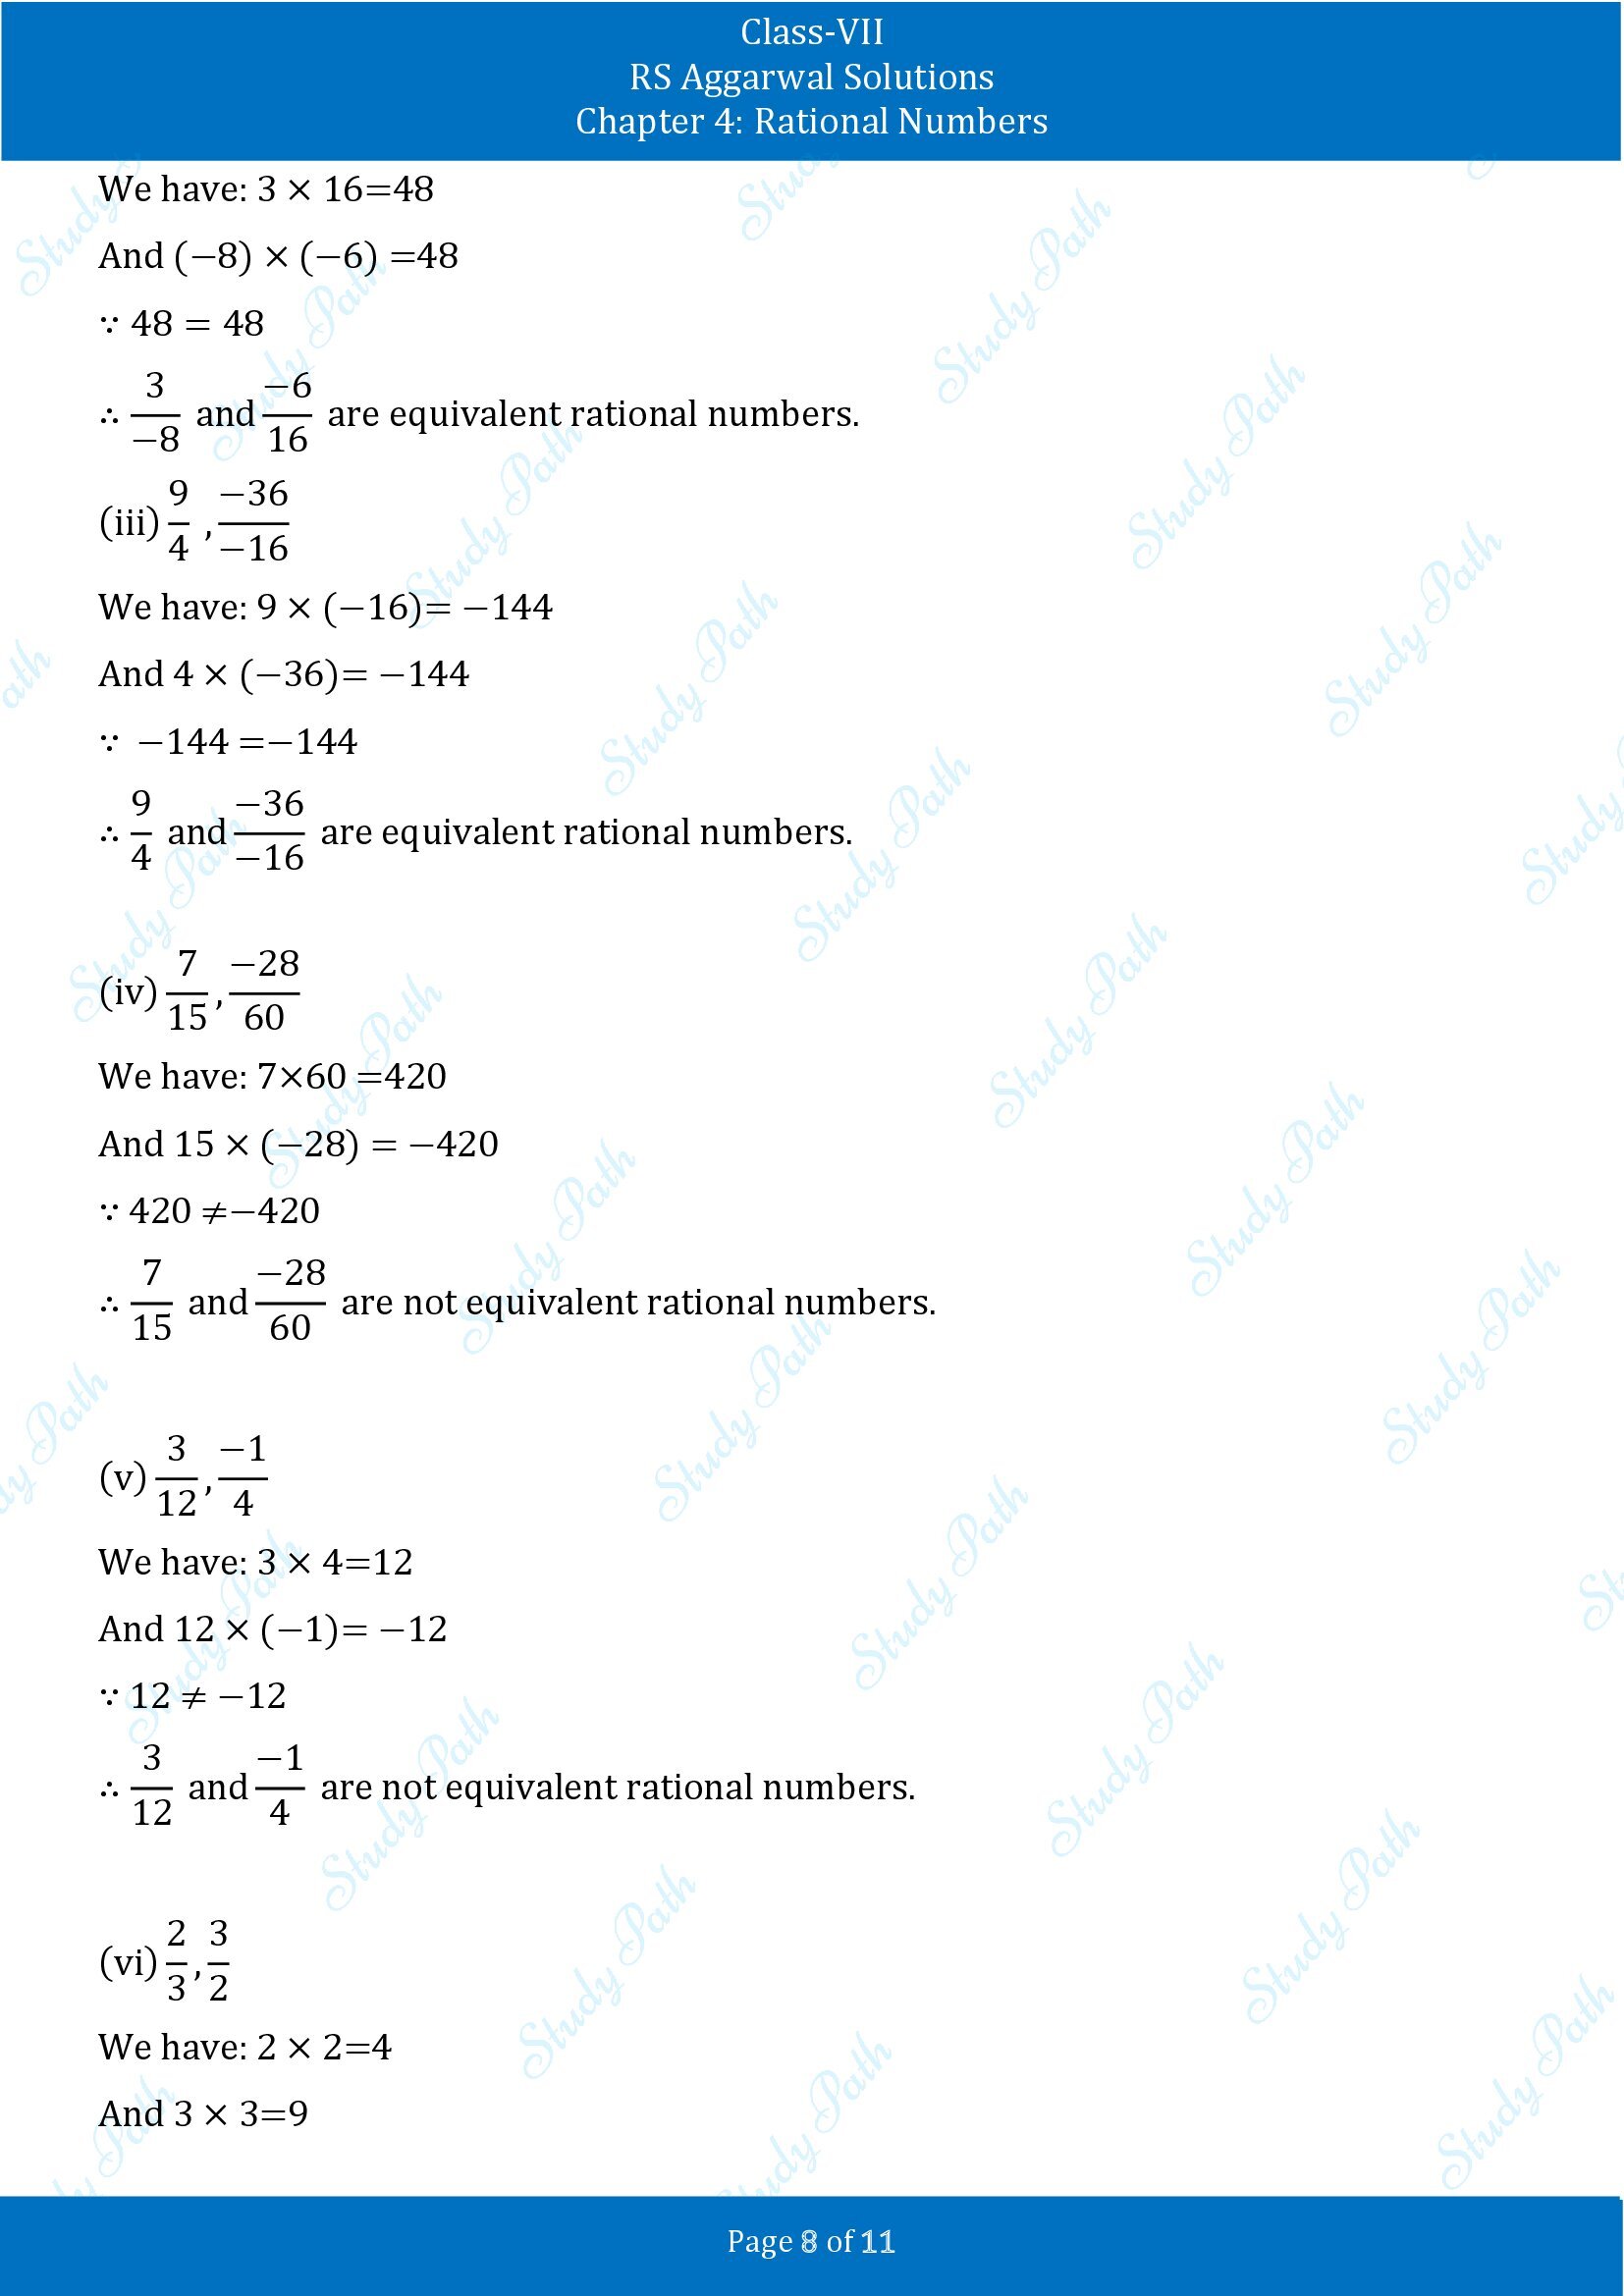 RS Aggarwal Solutions Class 7 Chapter 4 Rational Numbers Exercise 4A 00008